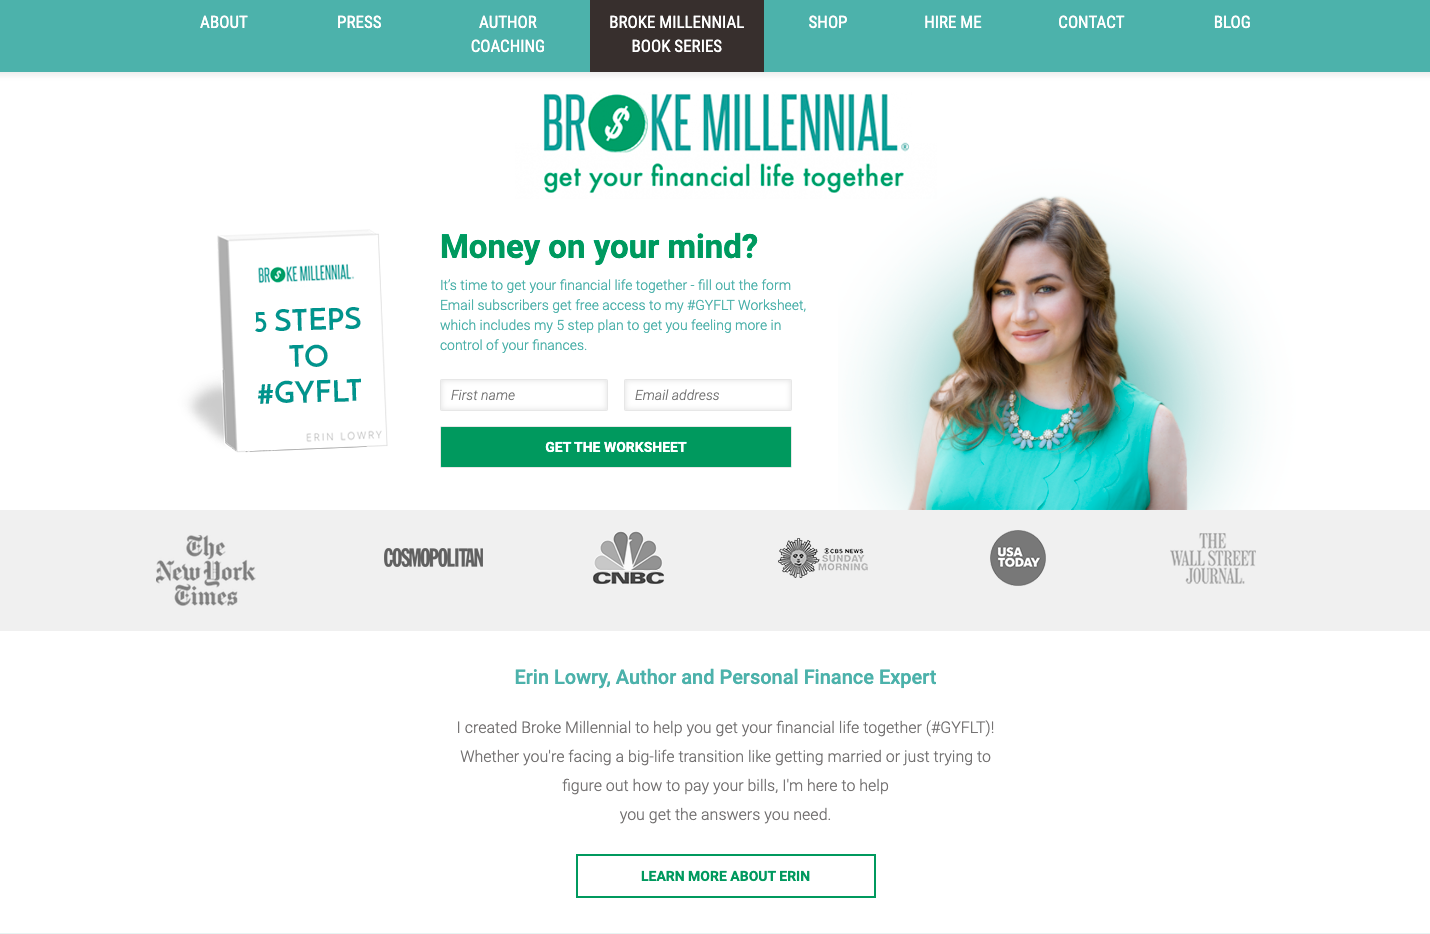 Broke Millennial home page opt-in